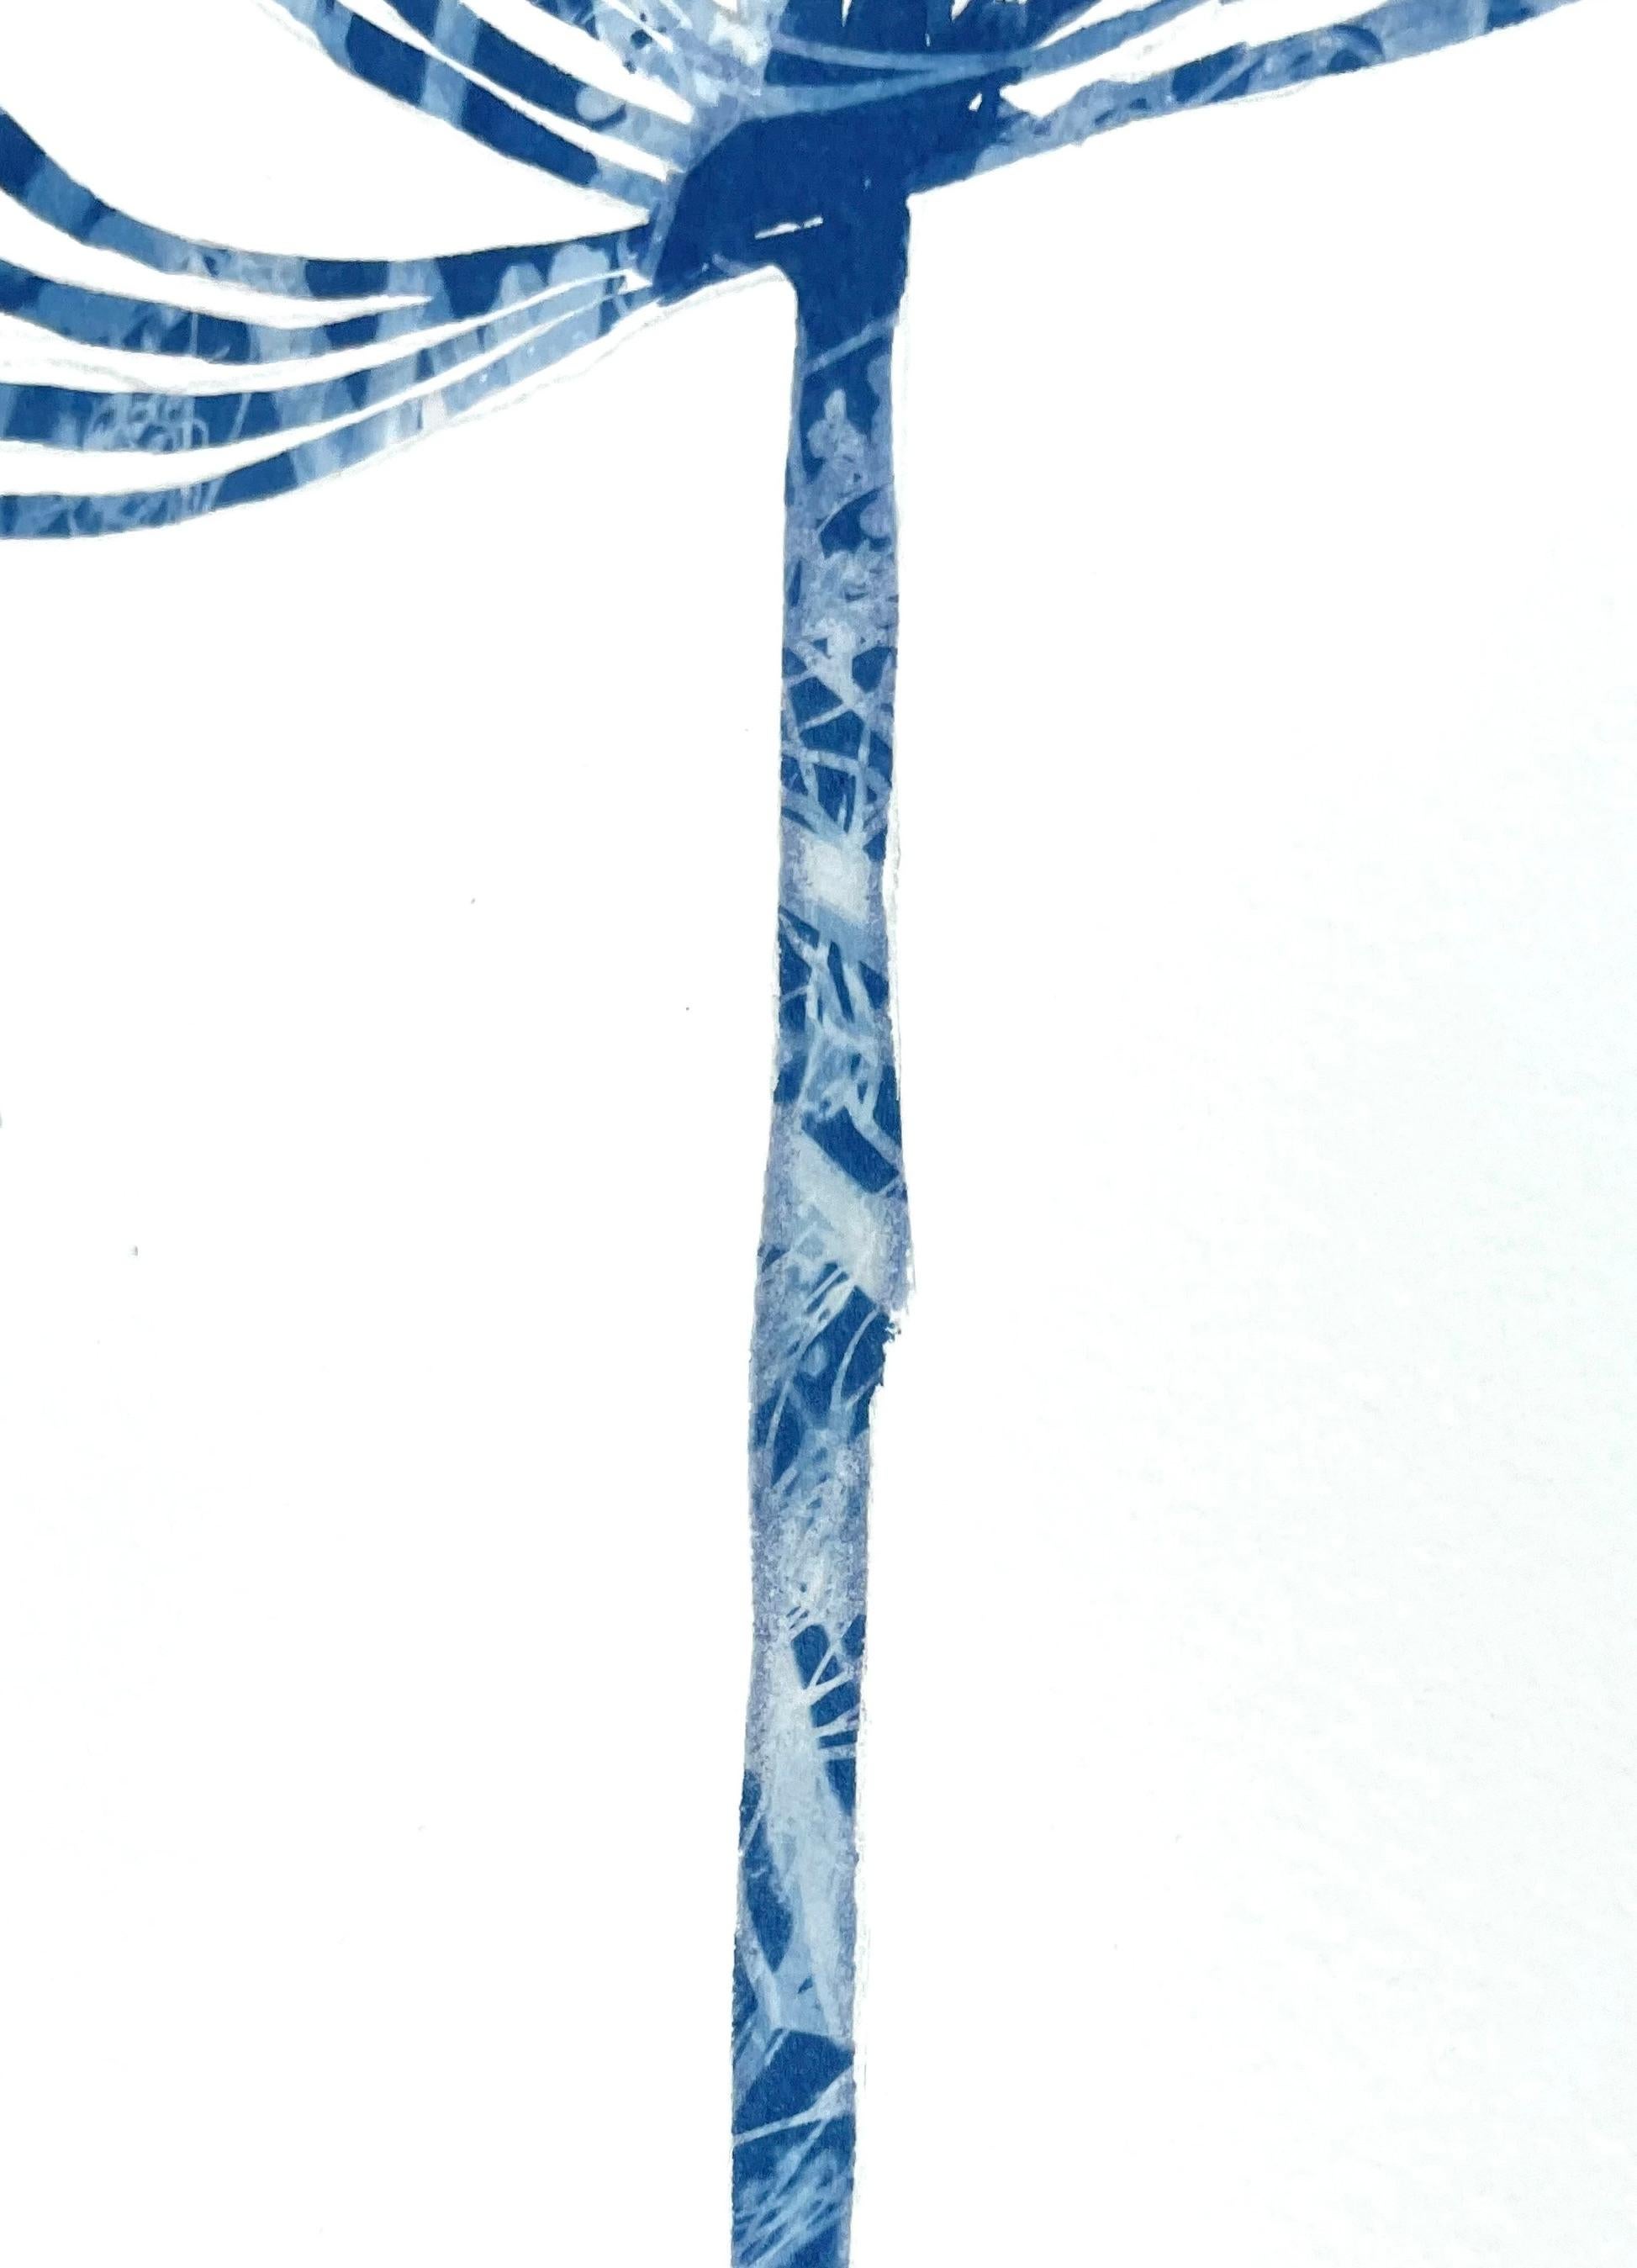 Delft Agapanthus 6 (Cyanotype Painting) For Sale 1